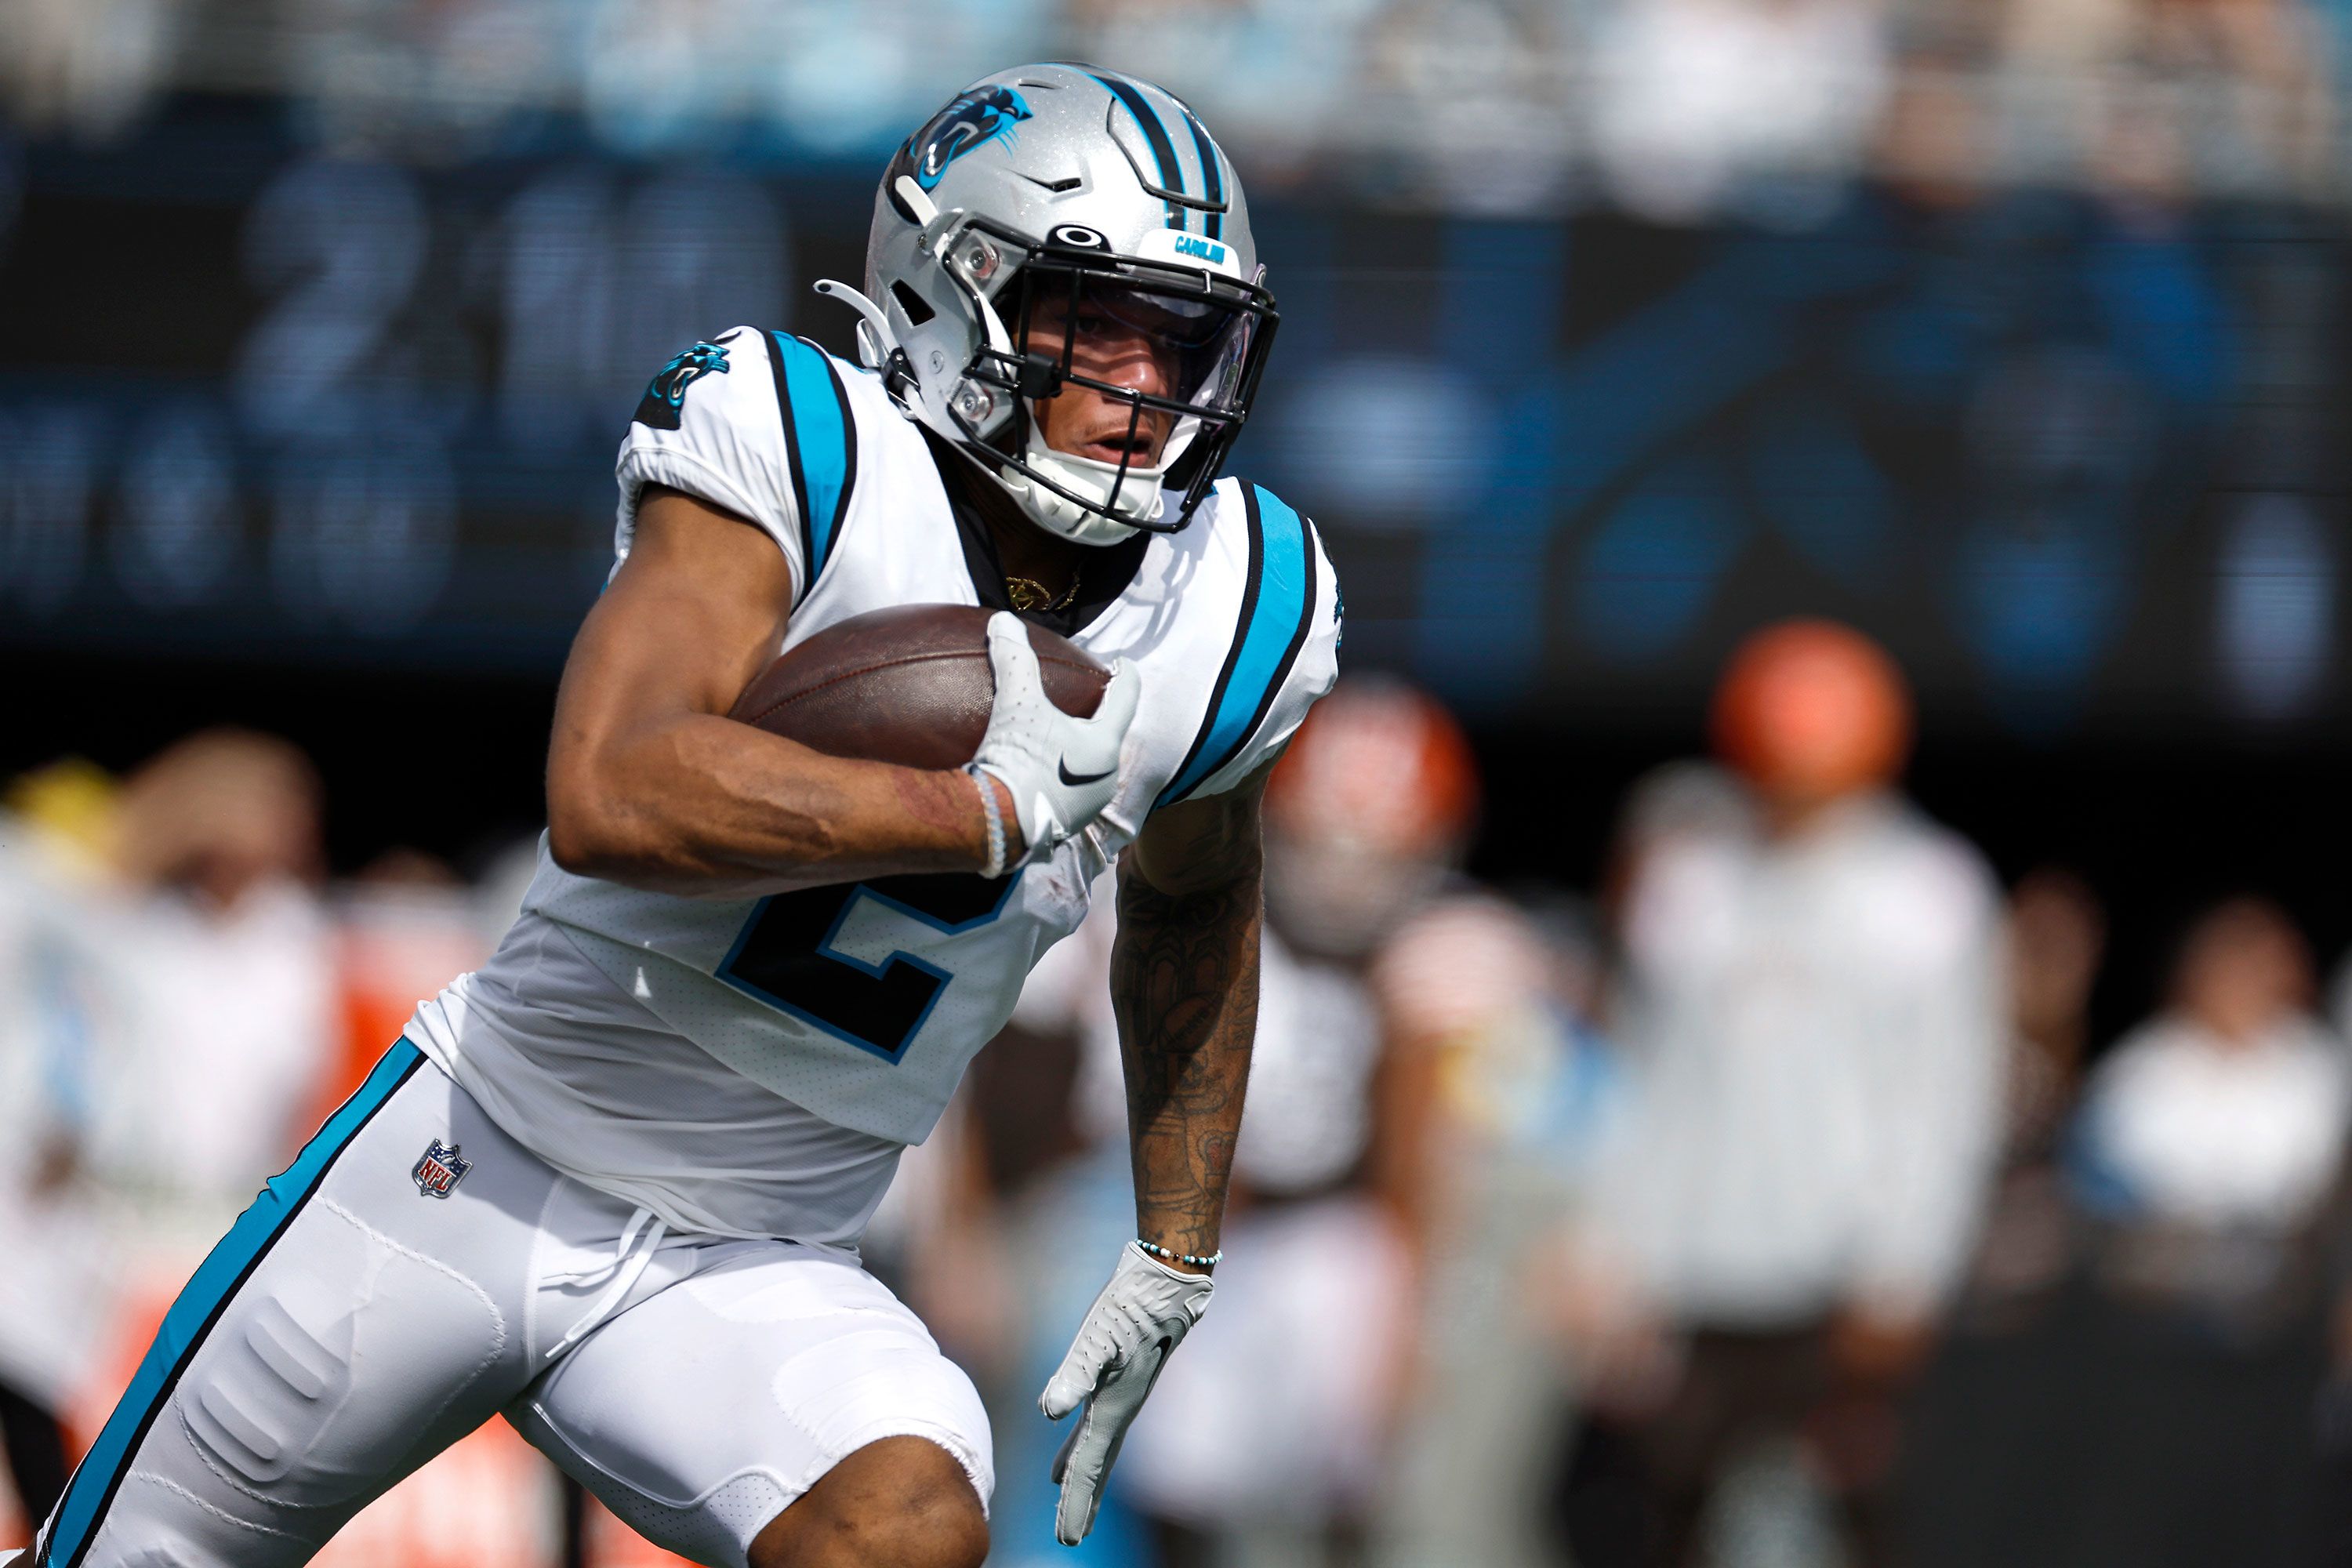 Chicago Bears trade No. 1 selection in NFL draft to Carolina Panthers for  wide receiver DJ Moore and picks, source says